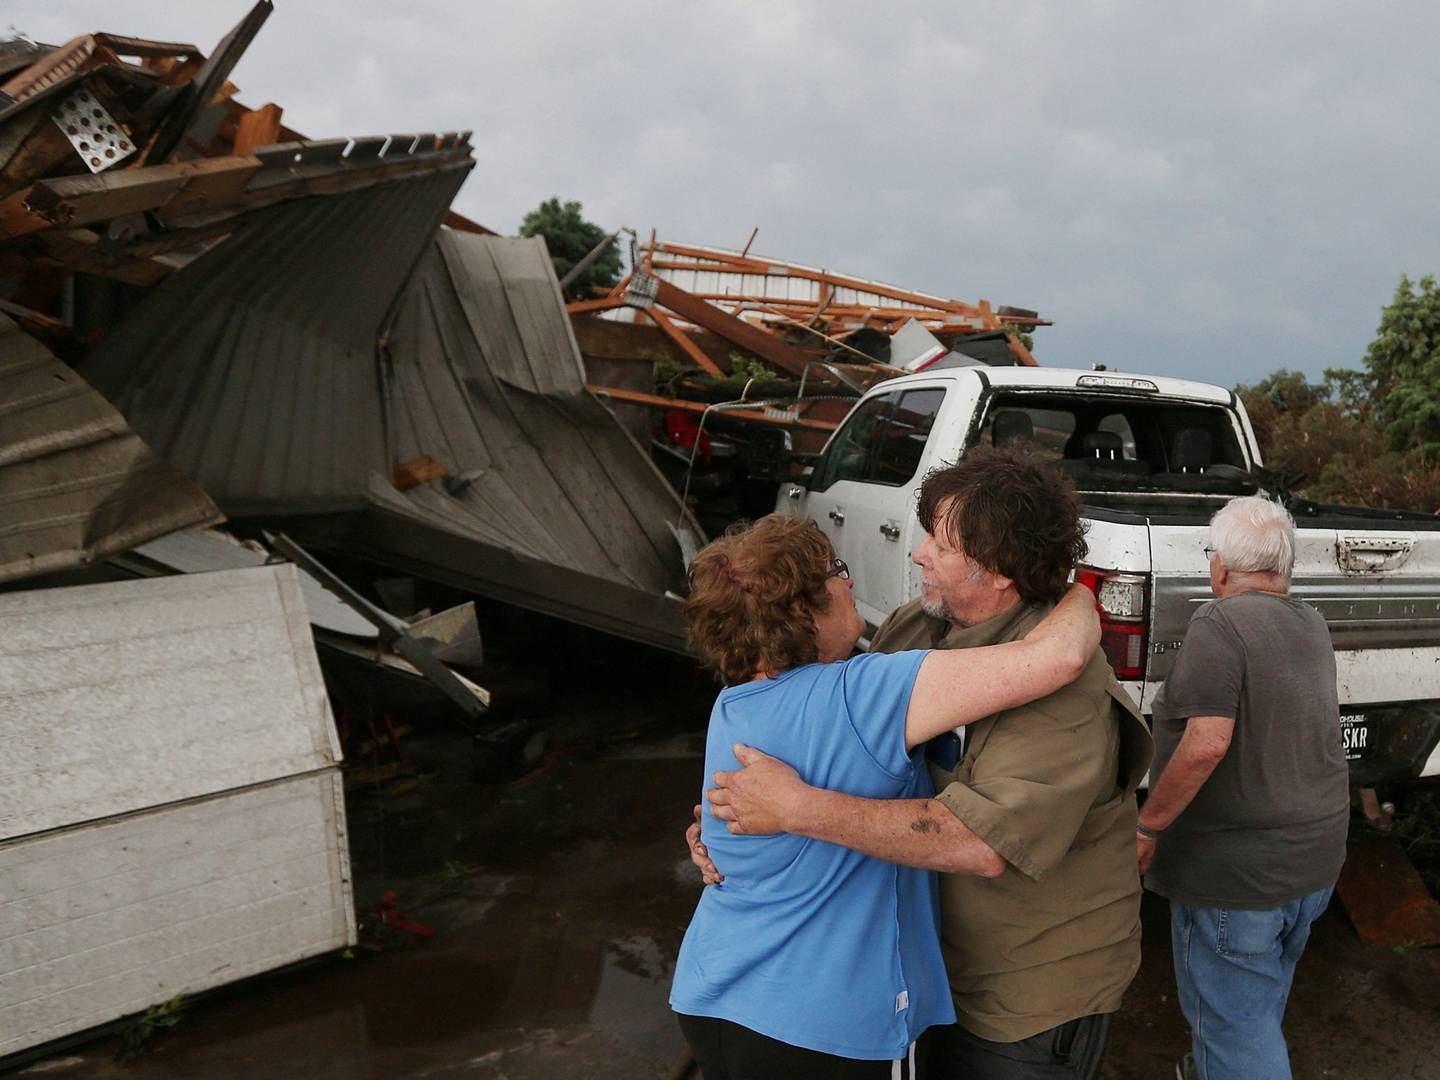 The tornadoes have claimed lives and caused significant property damage in Iowa. | Photo: Nirmalendu Majumdar/ames Tribune